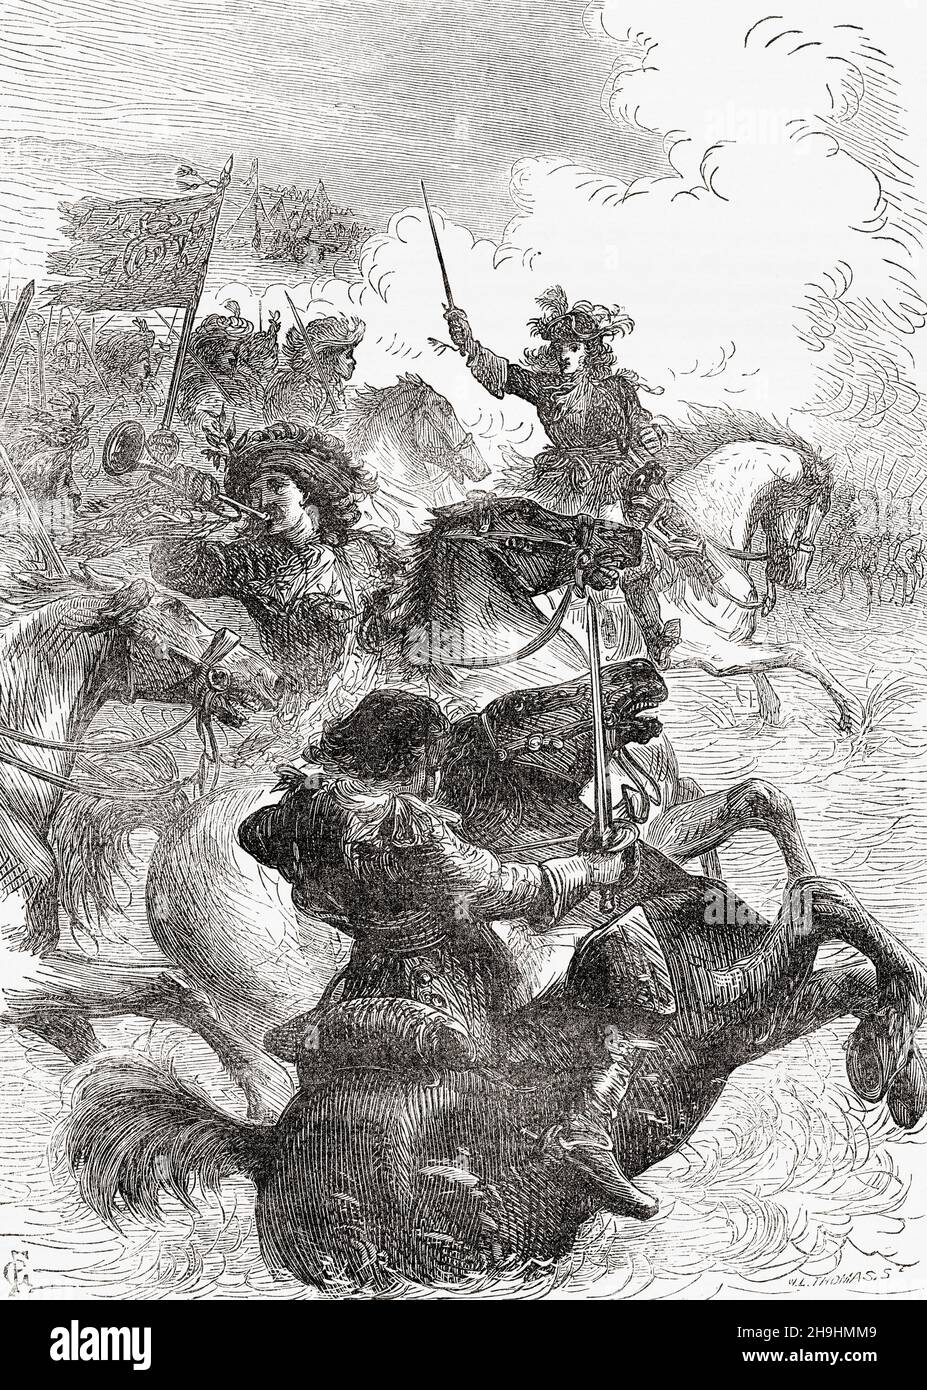 William III at the Battle of the Boyne, 1690.  King William III of England, 1650 -1702, Prince of Orange, Stadtholder of the main Dutch Republic provinces and King of England, Ireland, and Scotland from 1689  - 1702. From Cassell's Illustrated History of England, published c.1890. Stock Photo